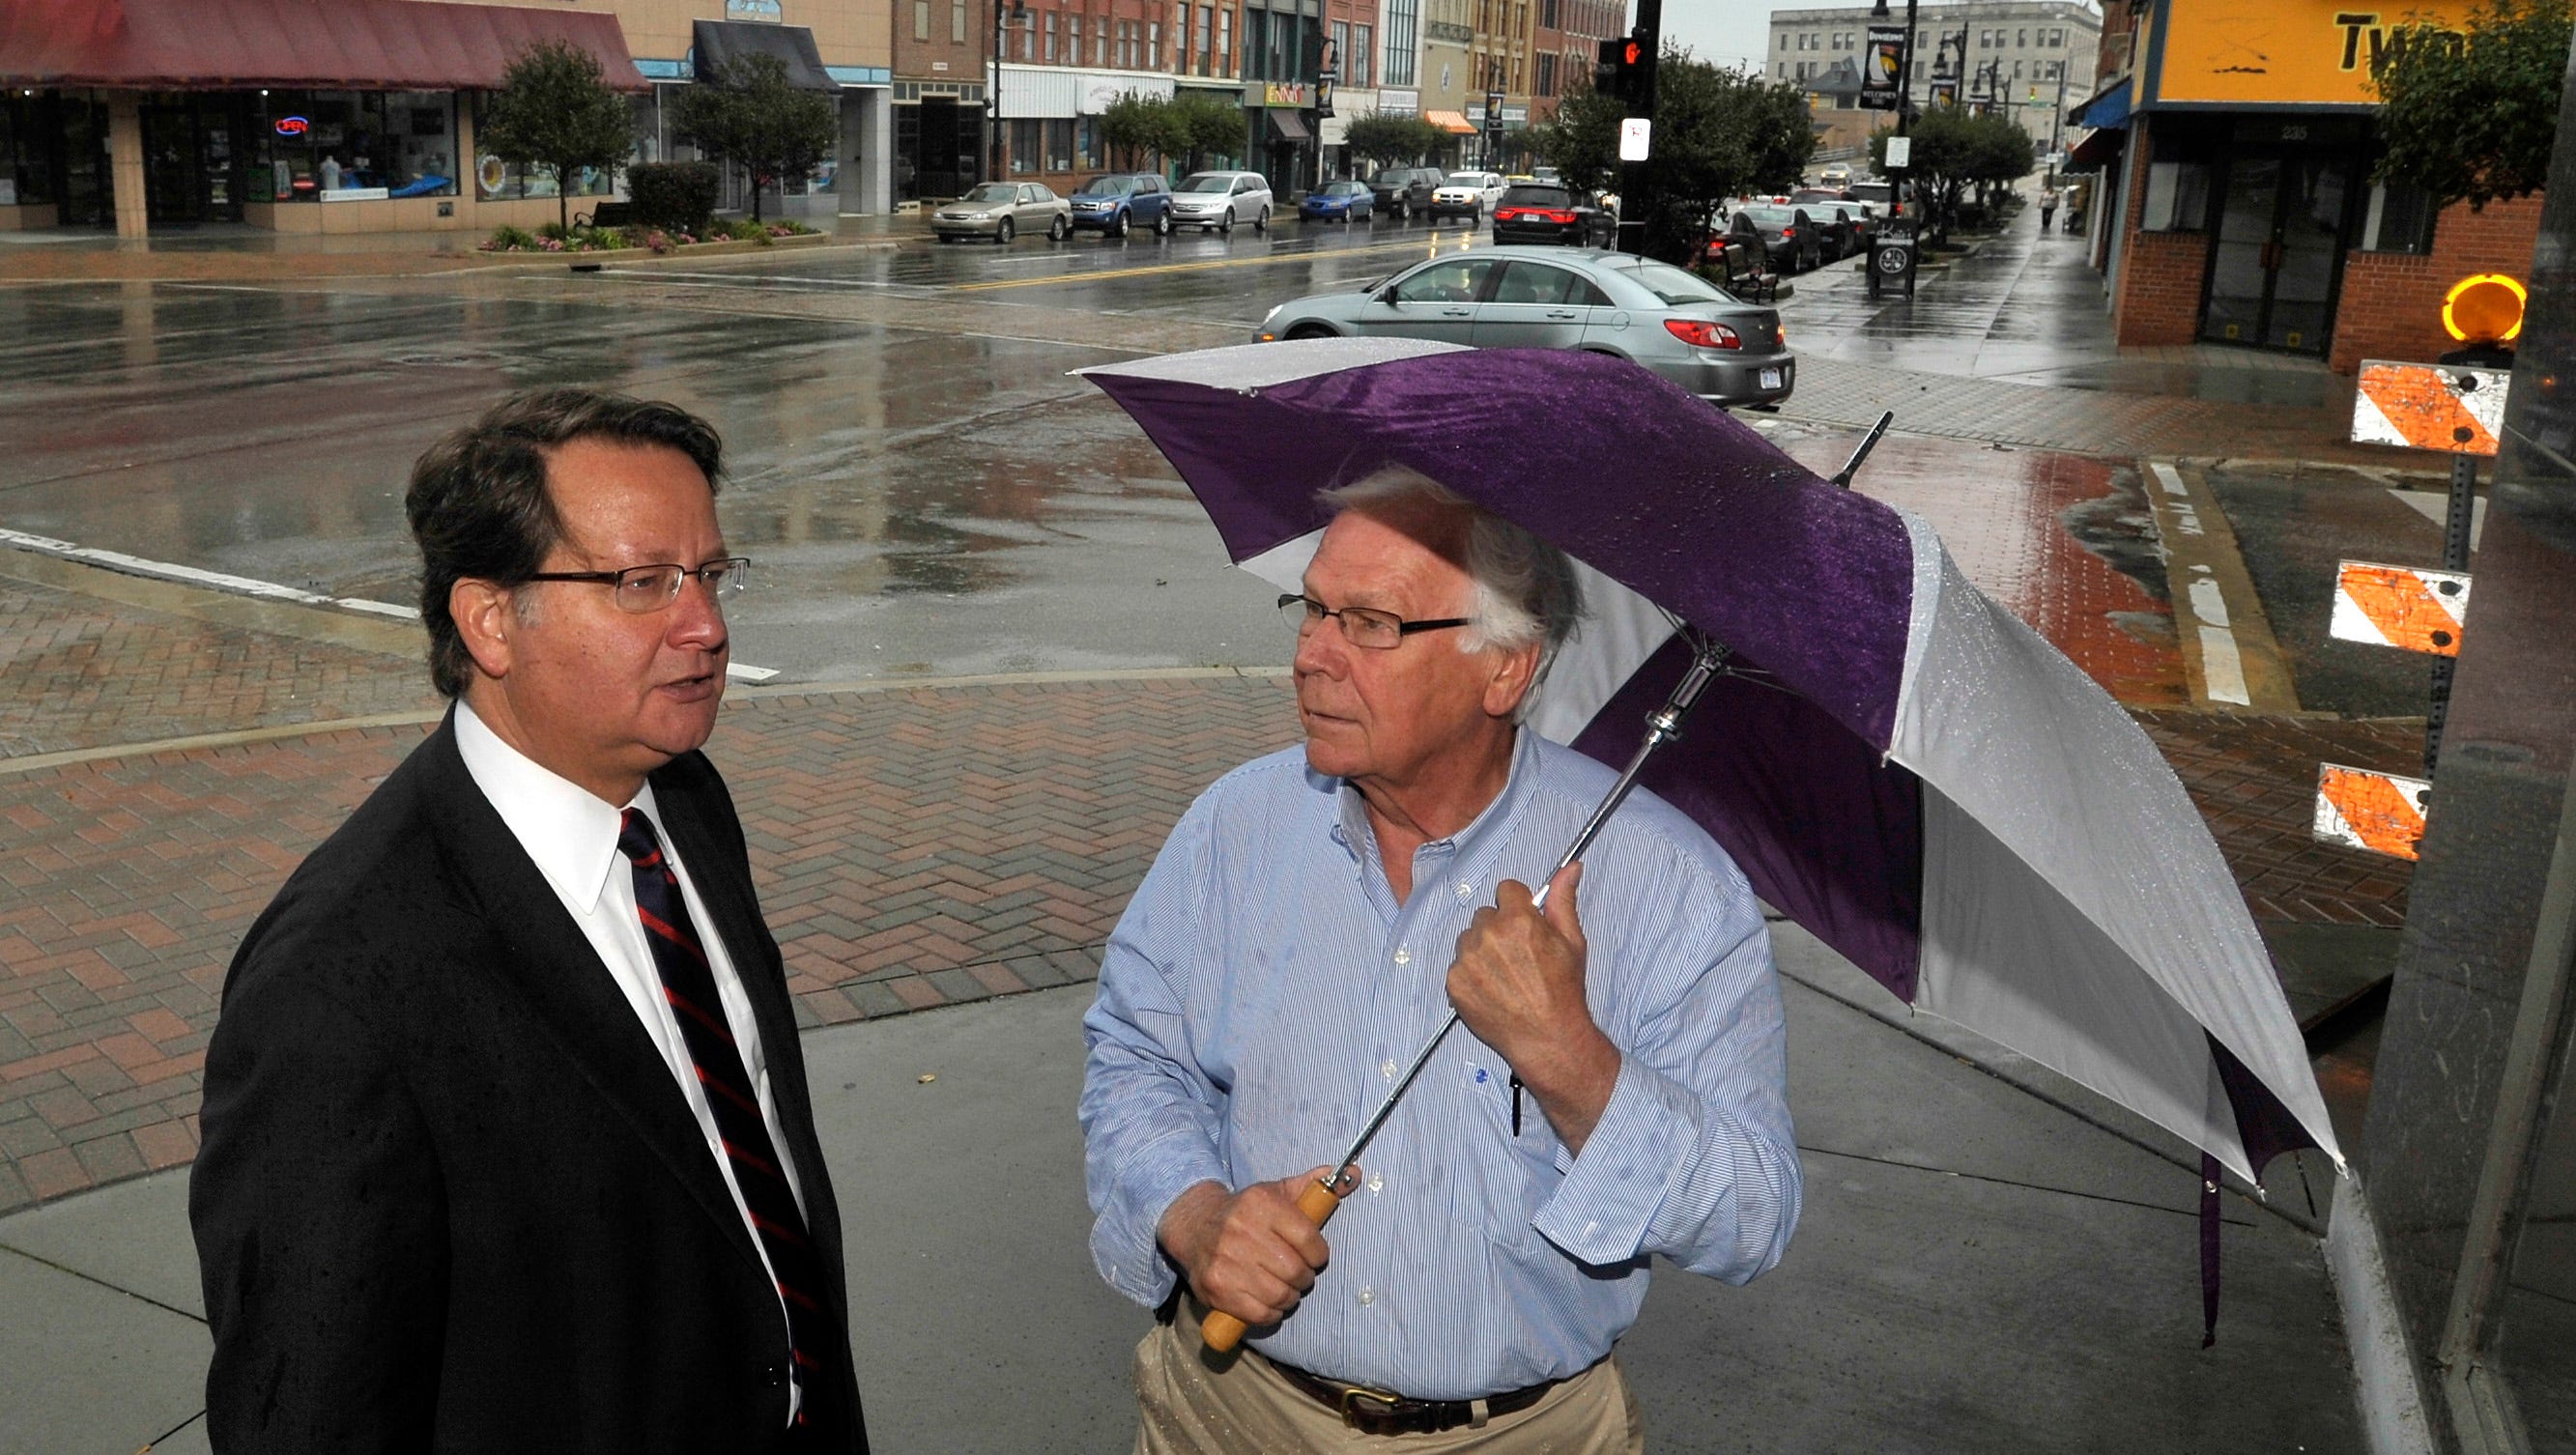 U.S. Congressman Gary Peters, left, talks with St. Clair County Commissioner Howard Heidemann in downtown Port Huron.